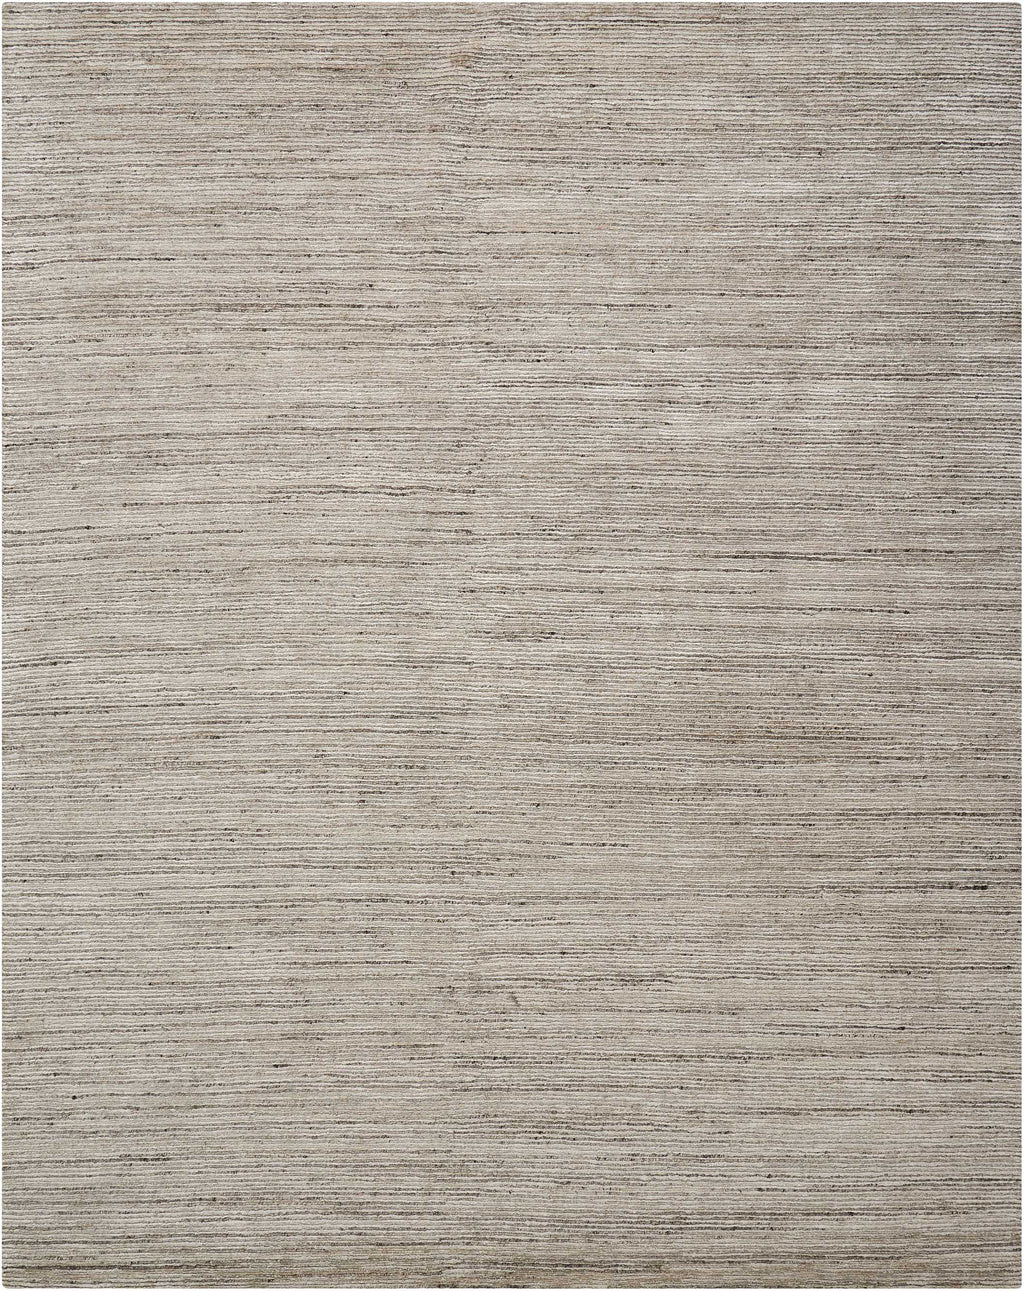 Neutral-toned textured surface with horizontal grain, resembling fabric or rug.